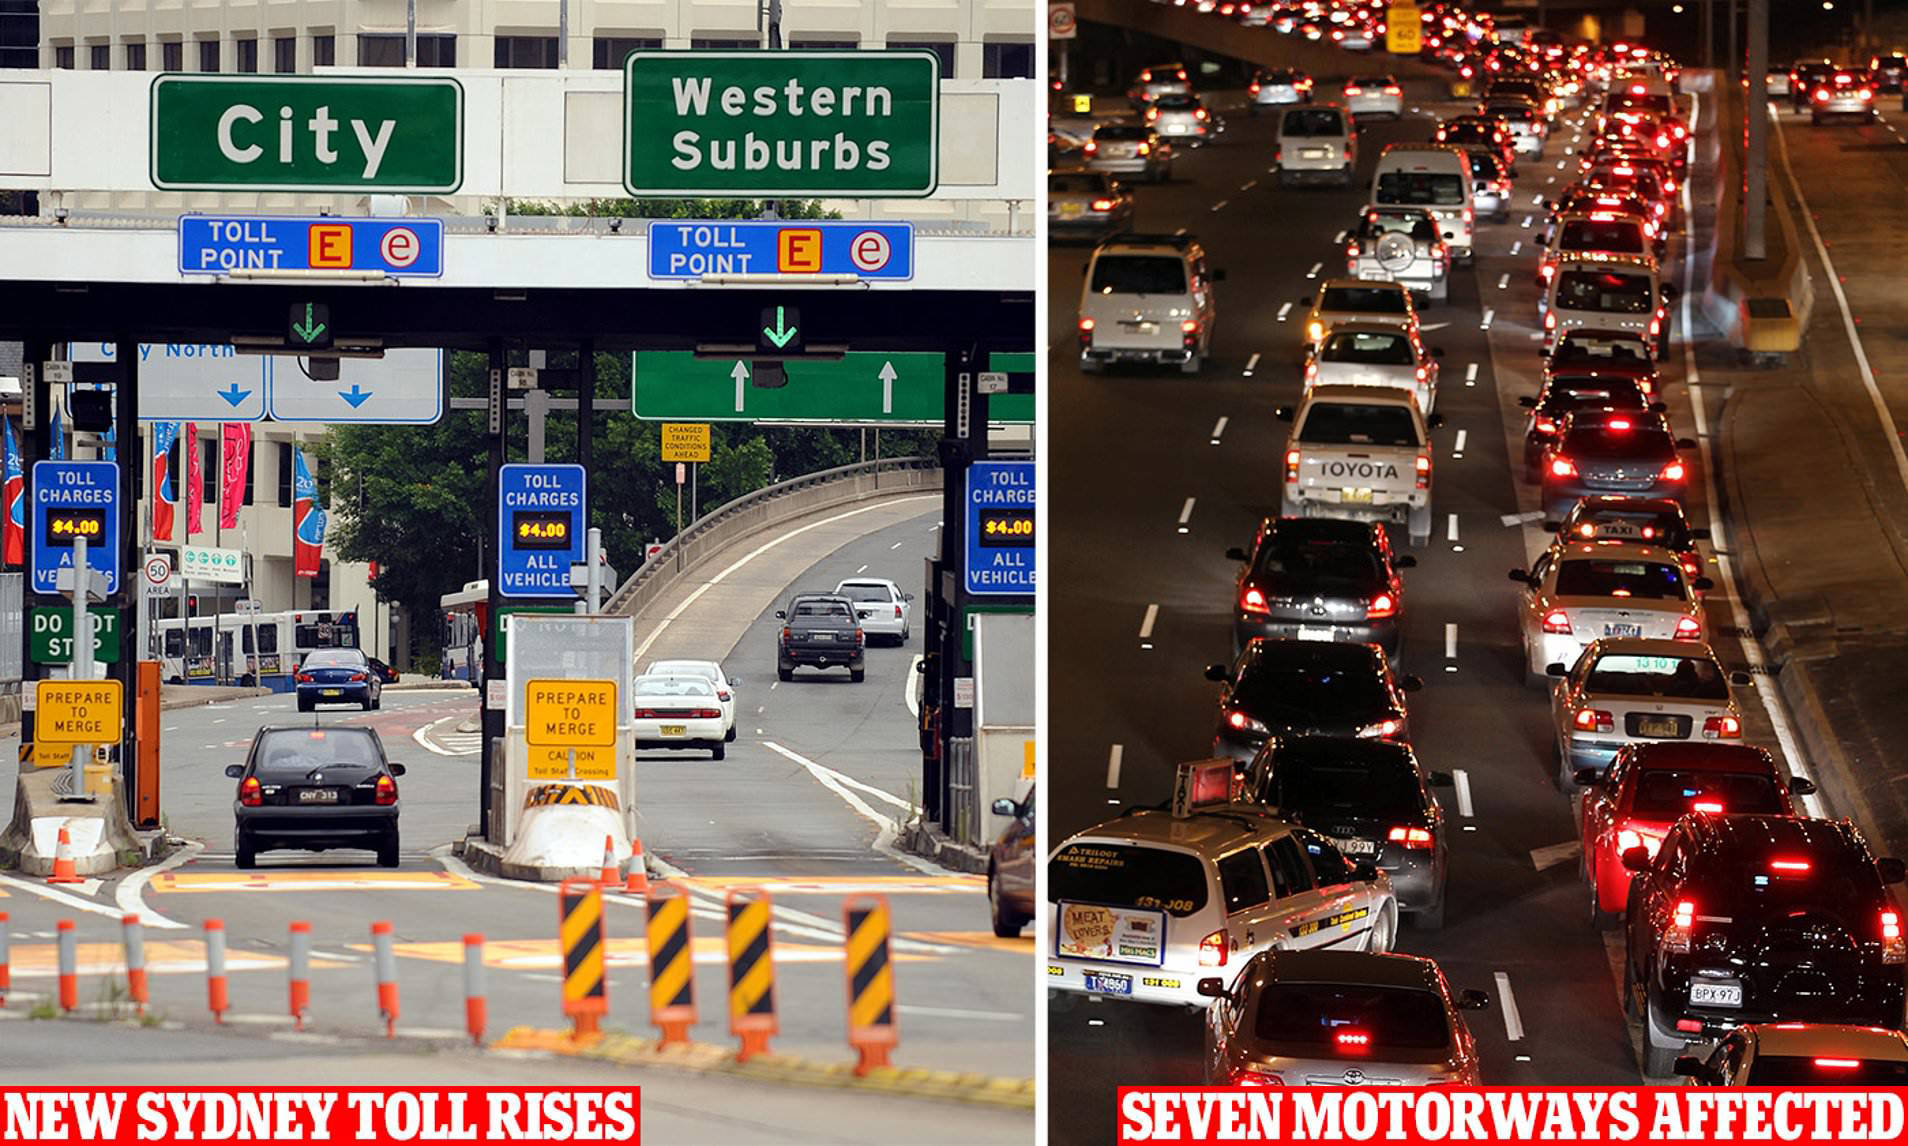 sydney-toll-rise-nsw-tolls-to-increase-commuters-offered-toll-rebate